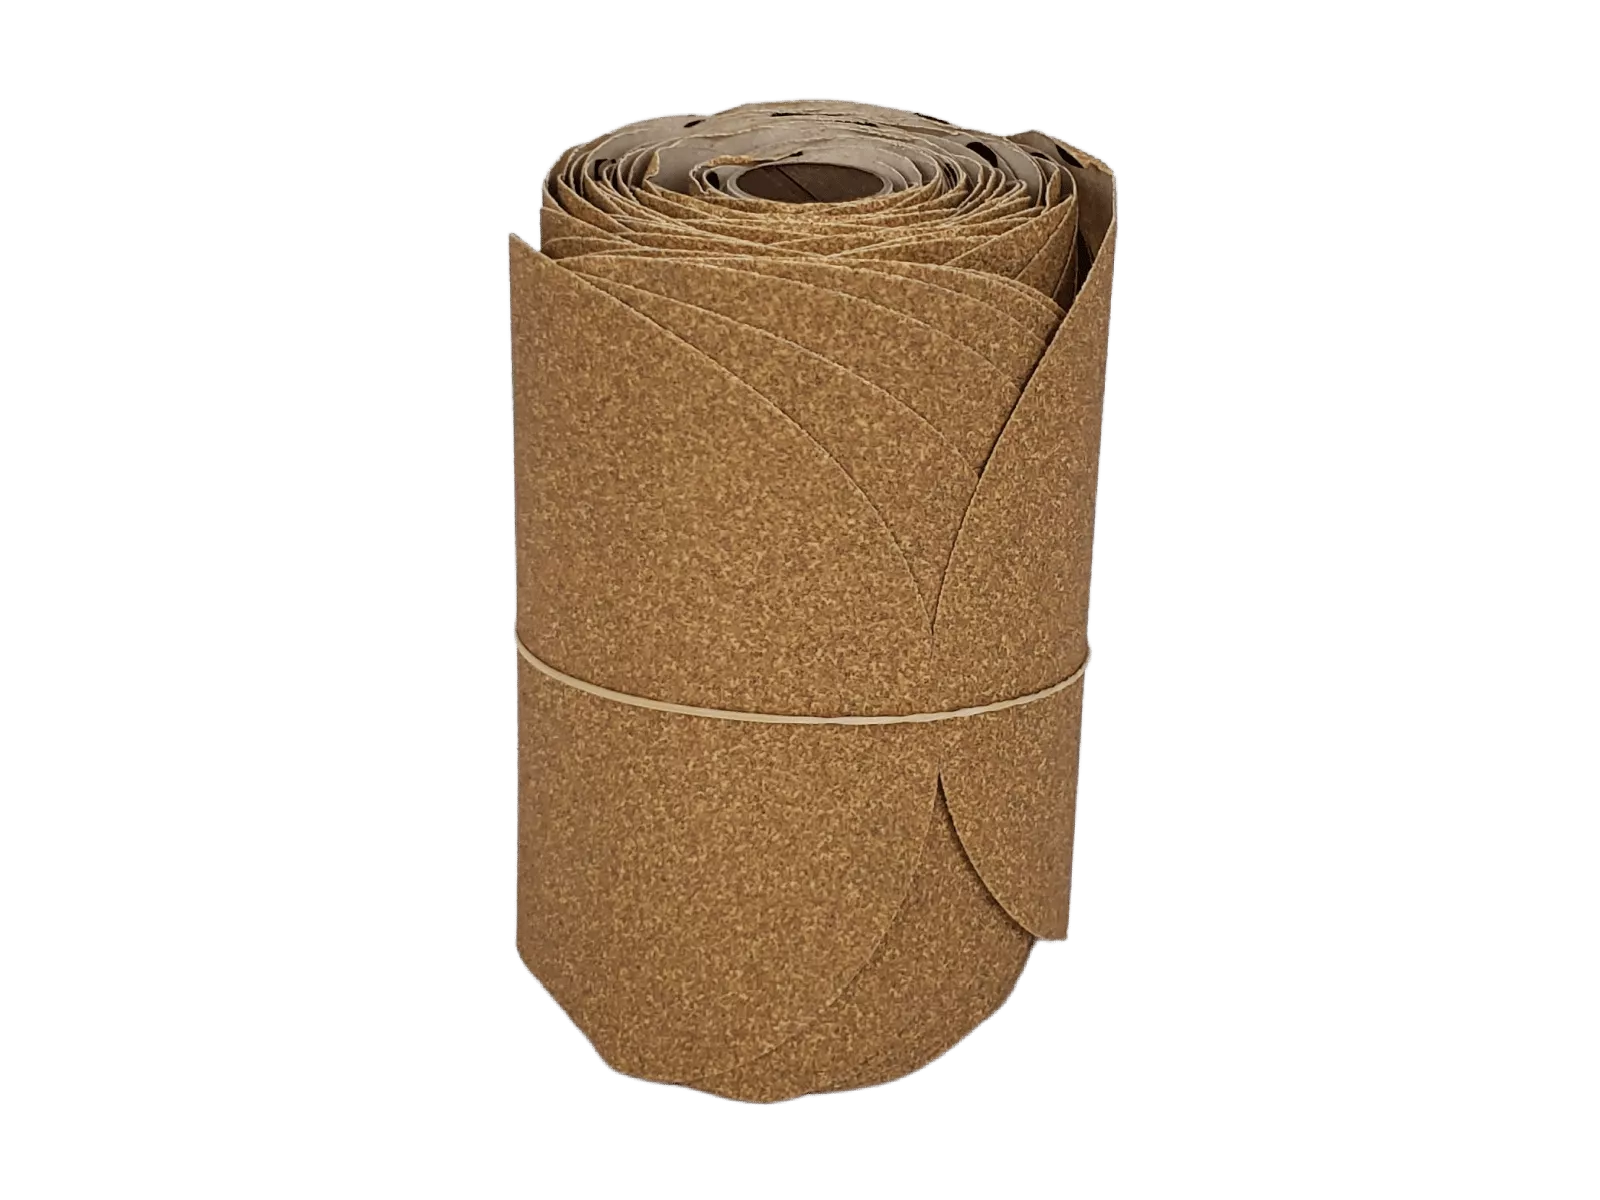 Bundle of brown sandpaper circles, bound together with a rubber band, used for truck bed sanding prior to bedliner spray application.